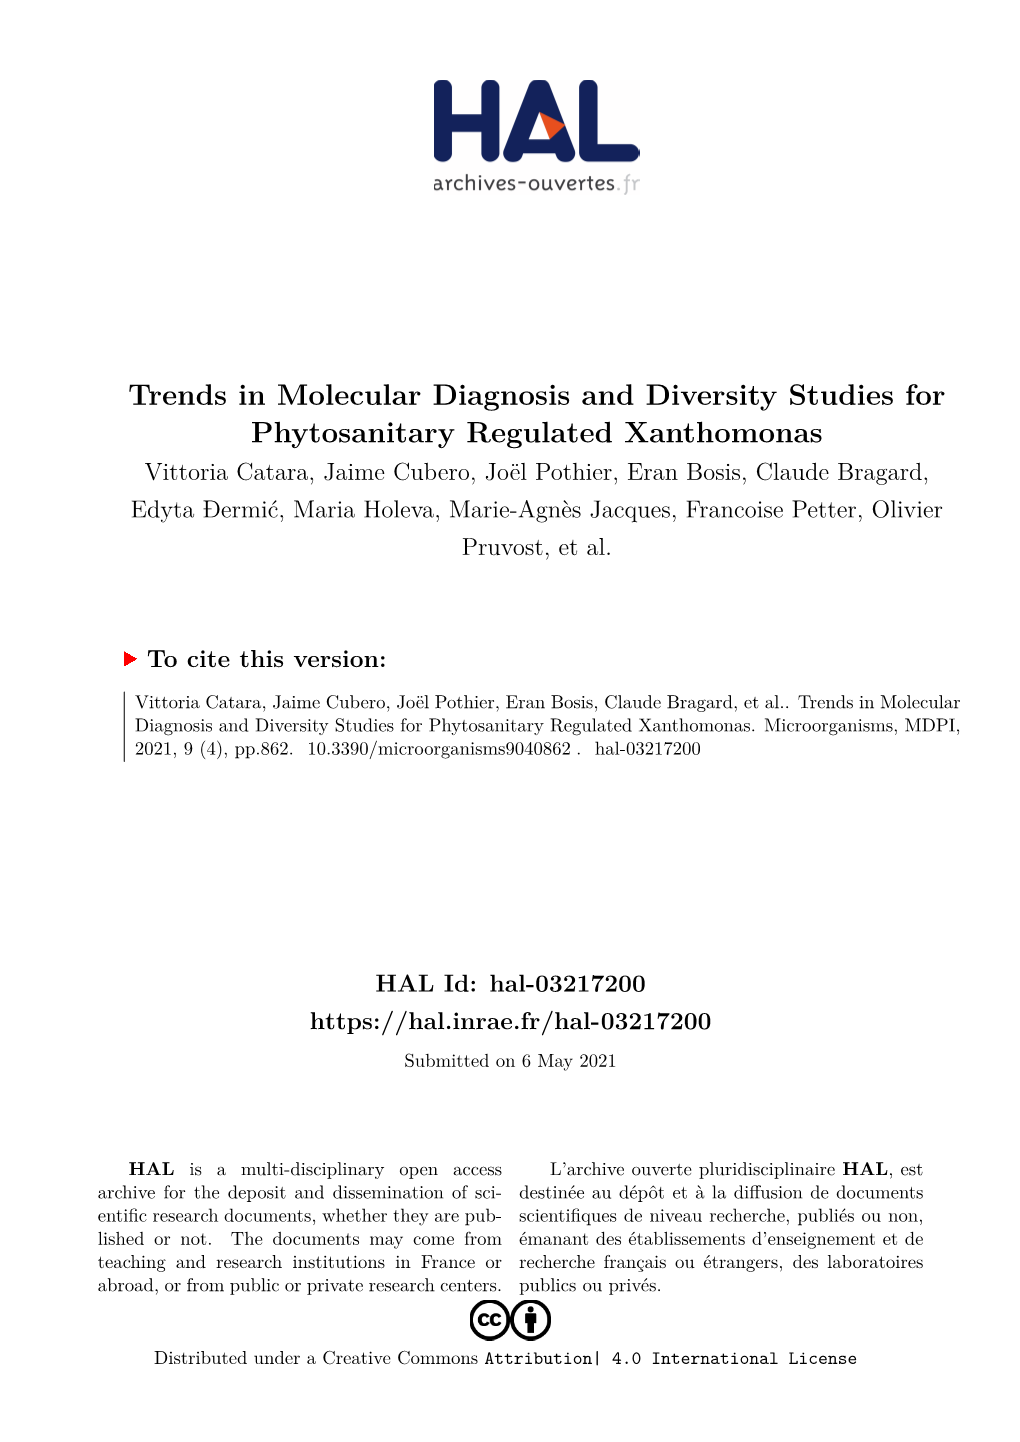 Trends in Molecular Diagnosis and Diversity Studies For